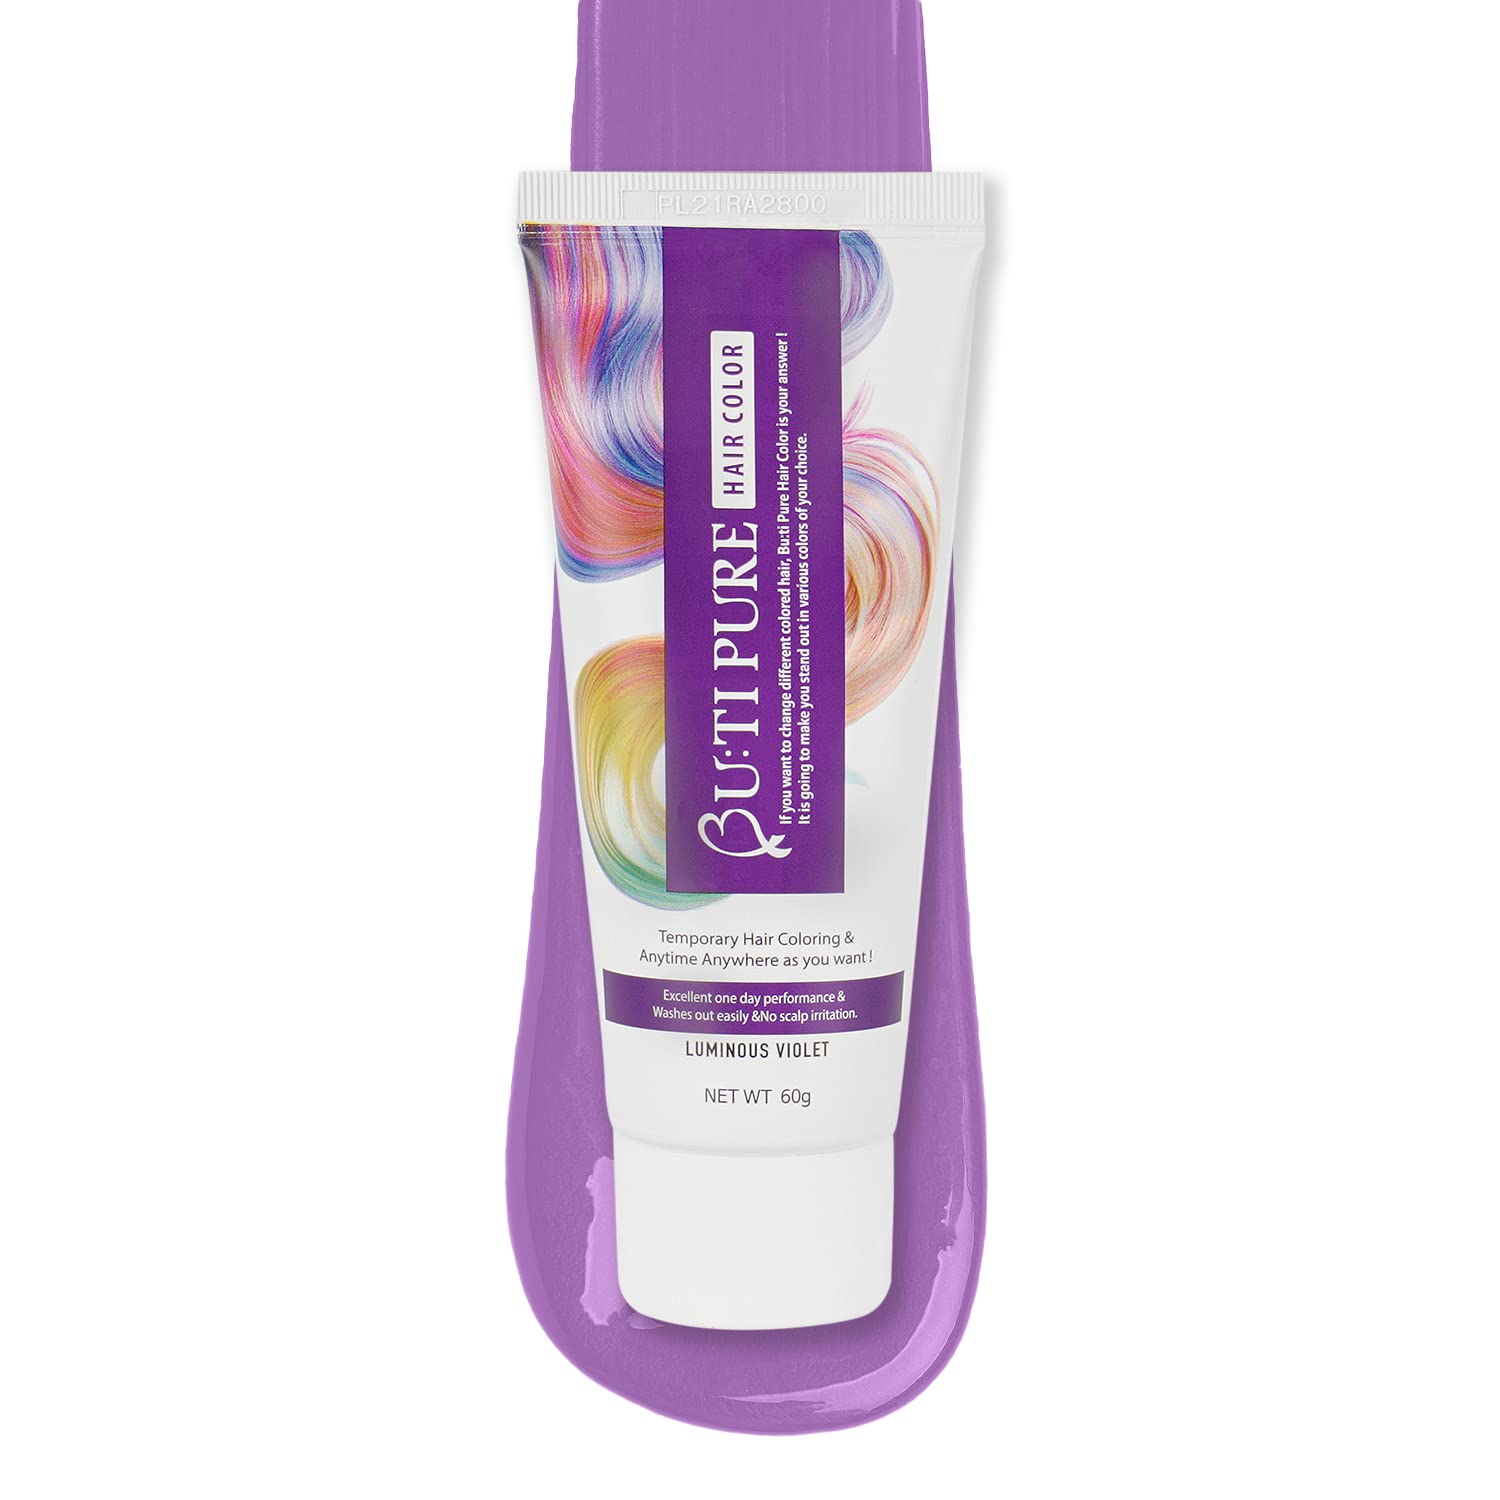 ButiPure Luminous Violet One Day Hair Color (60g) Buti Pure